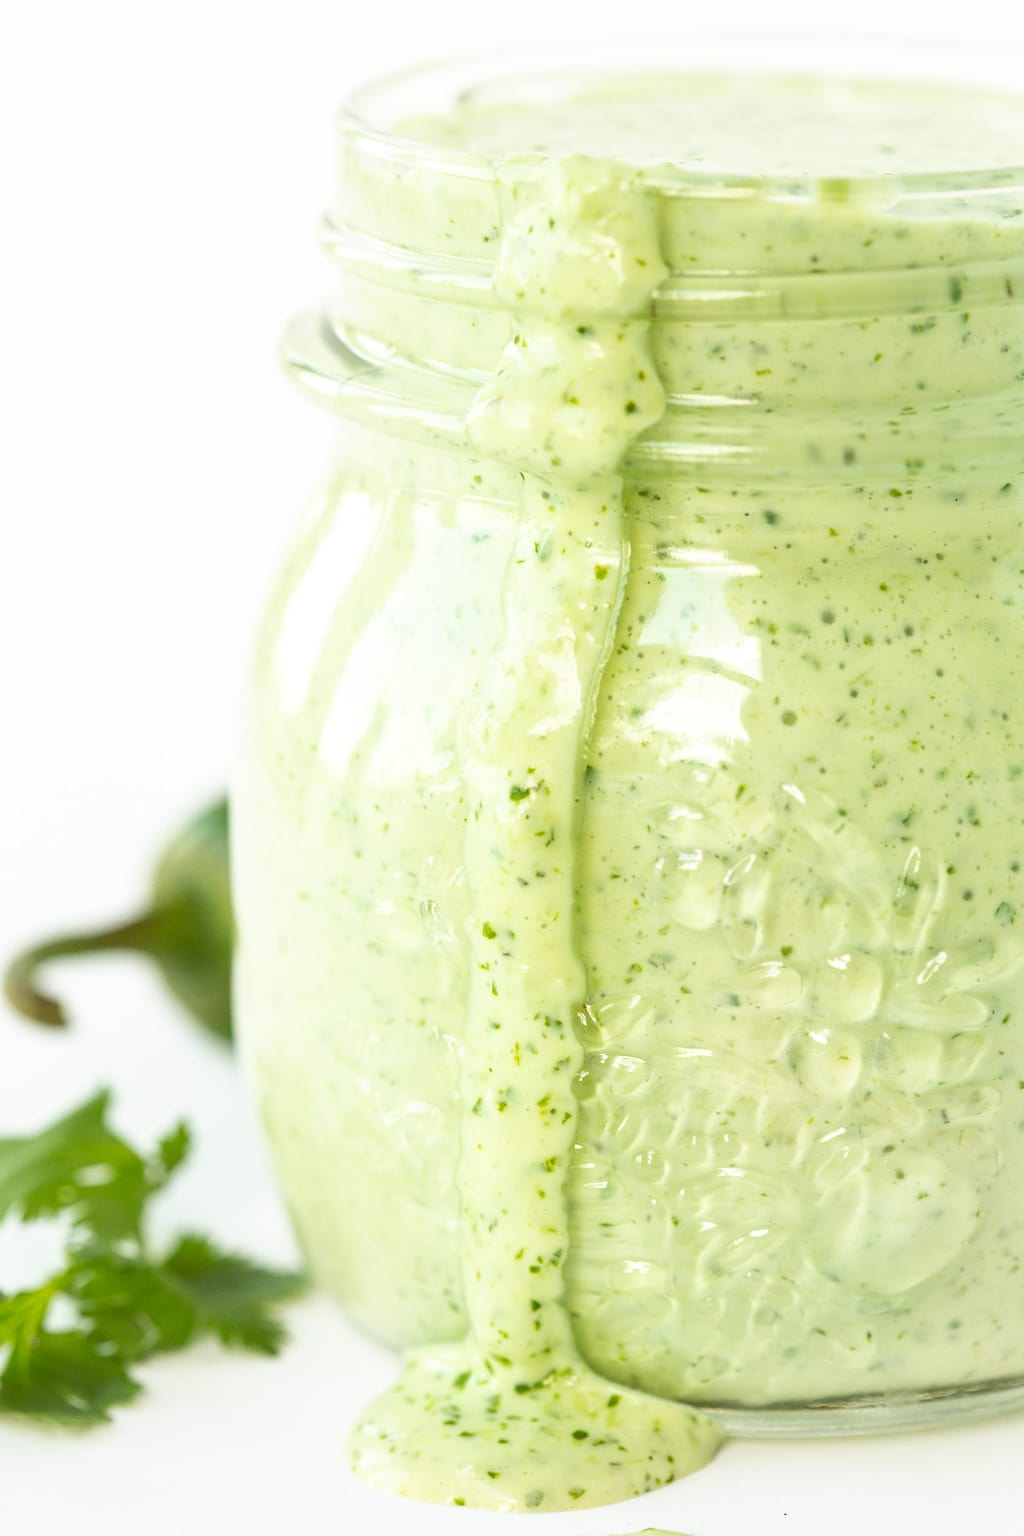 Vertical closeup photo of a glass jar filled with Light and Spicy Cilantro Buttermilk Dressing.